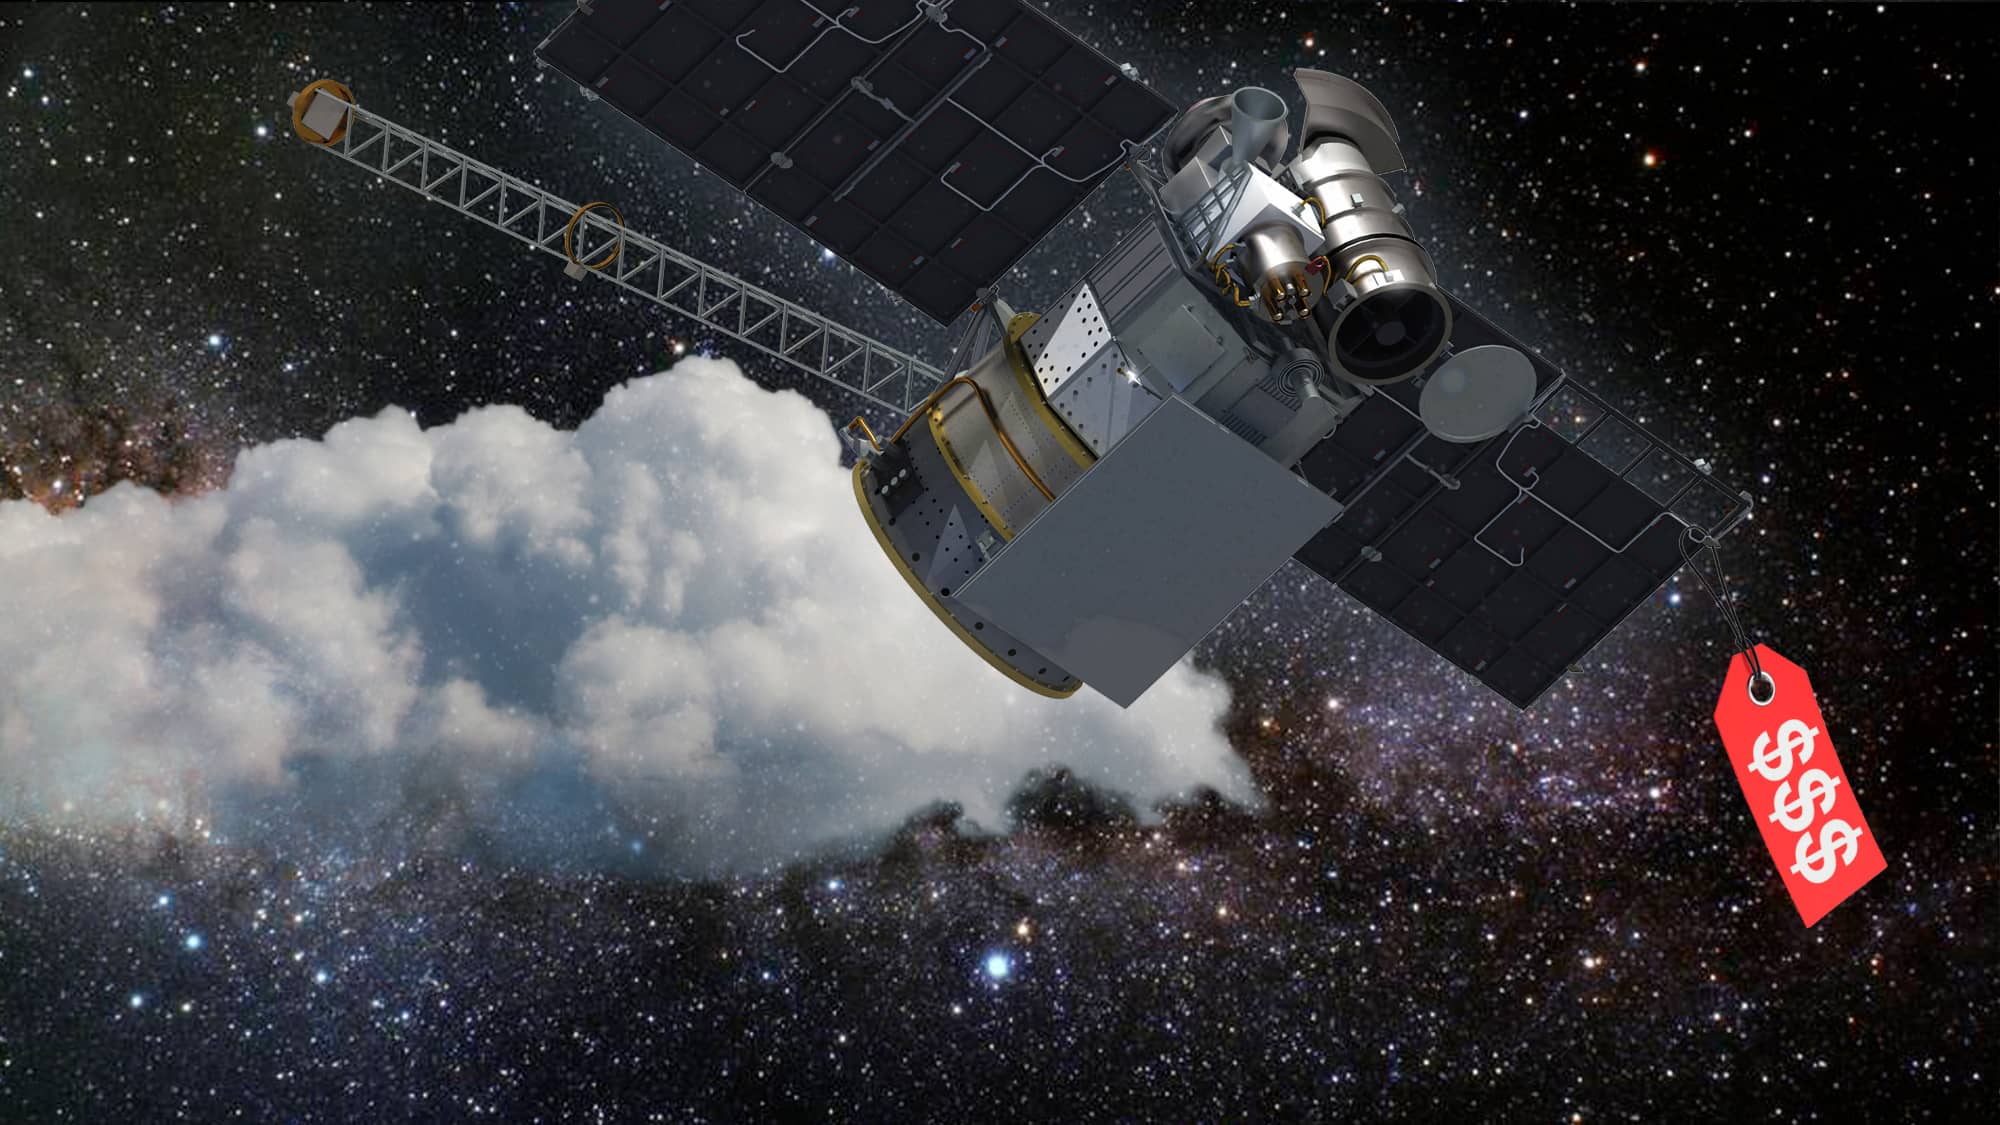 Expensive private weather forecast satellite